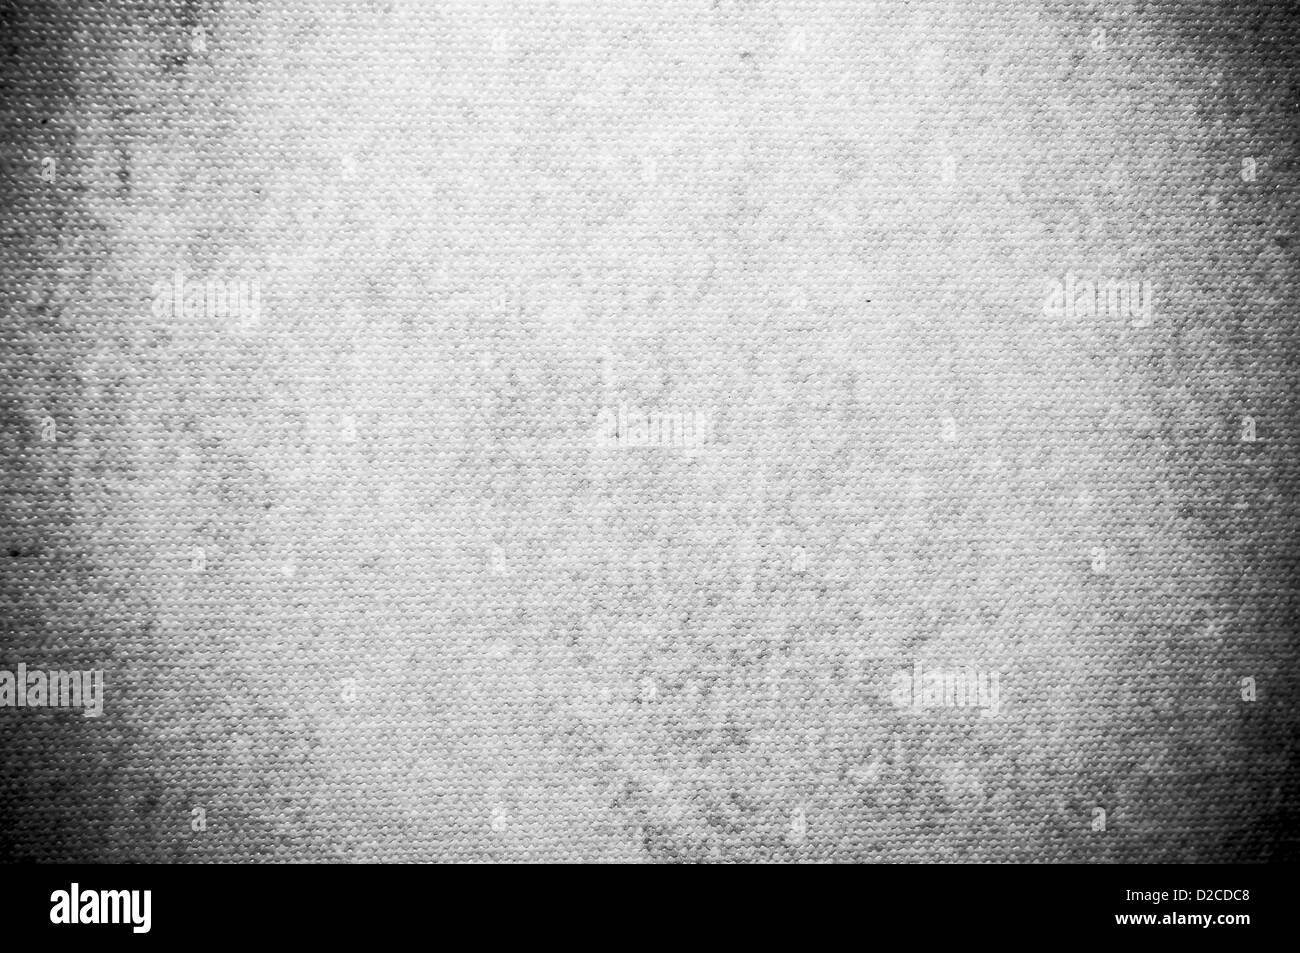 gray canvas texture or background Stock Photo